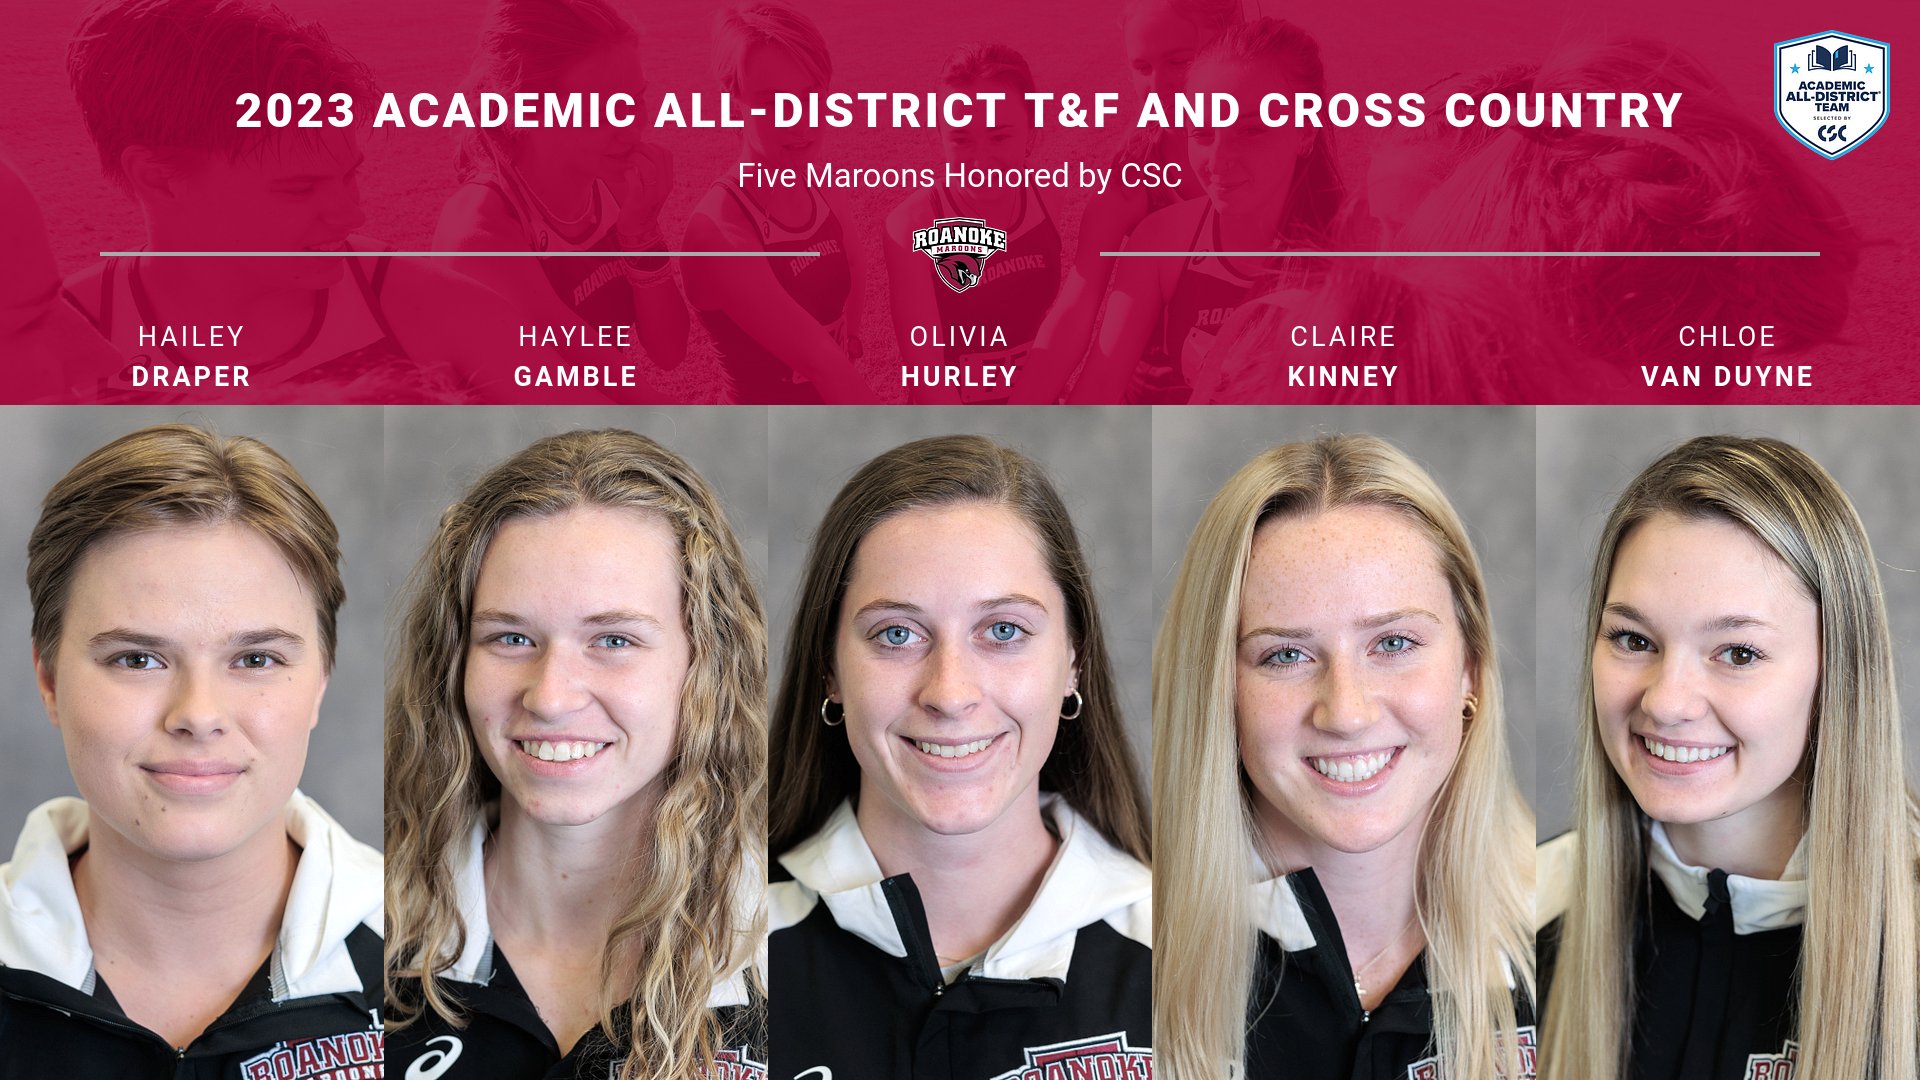 Five Men, Five Women Maroons Named to CSC Academic All-District Team